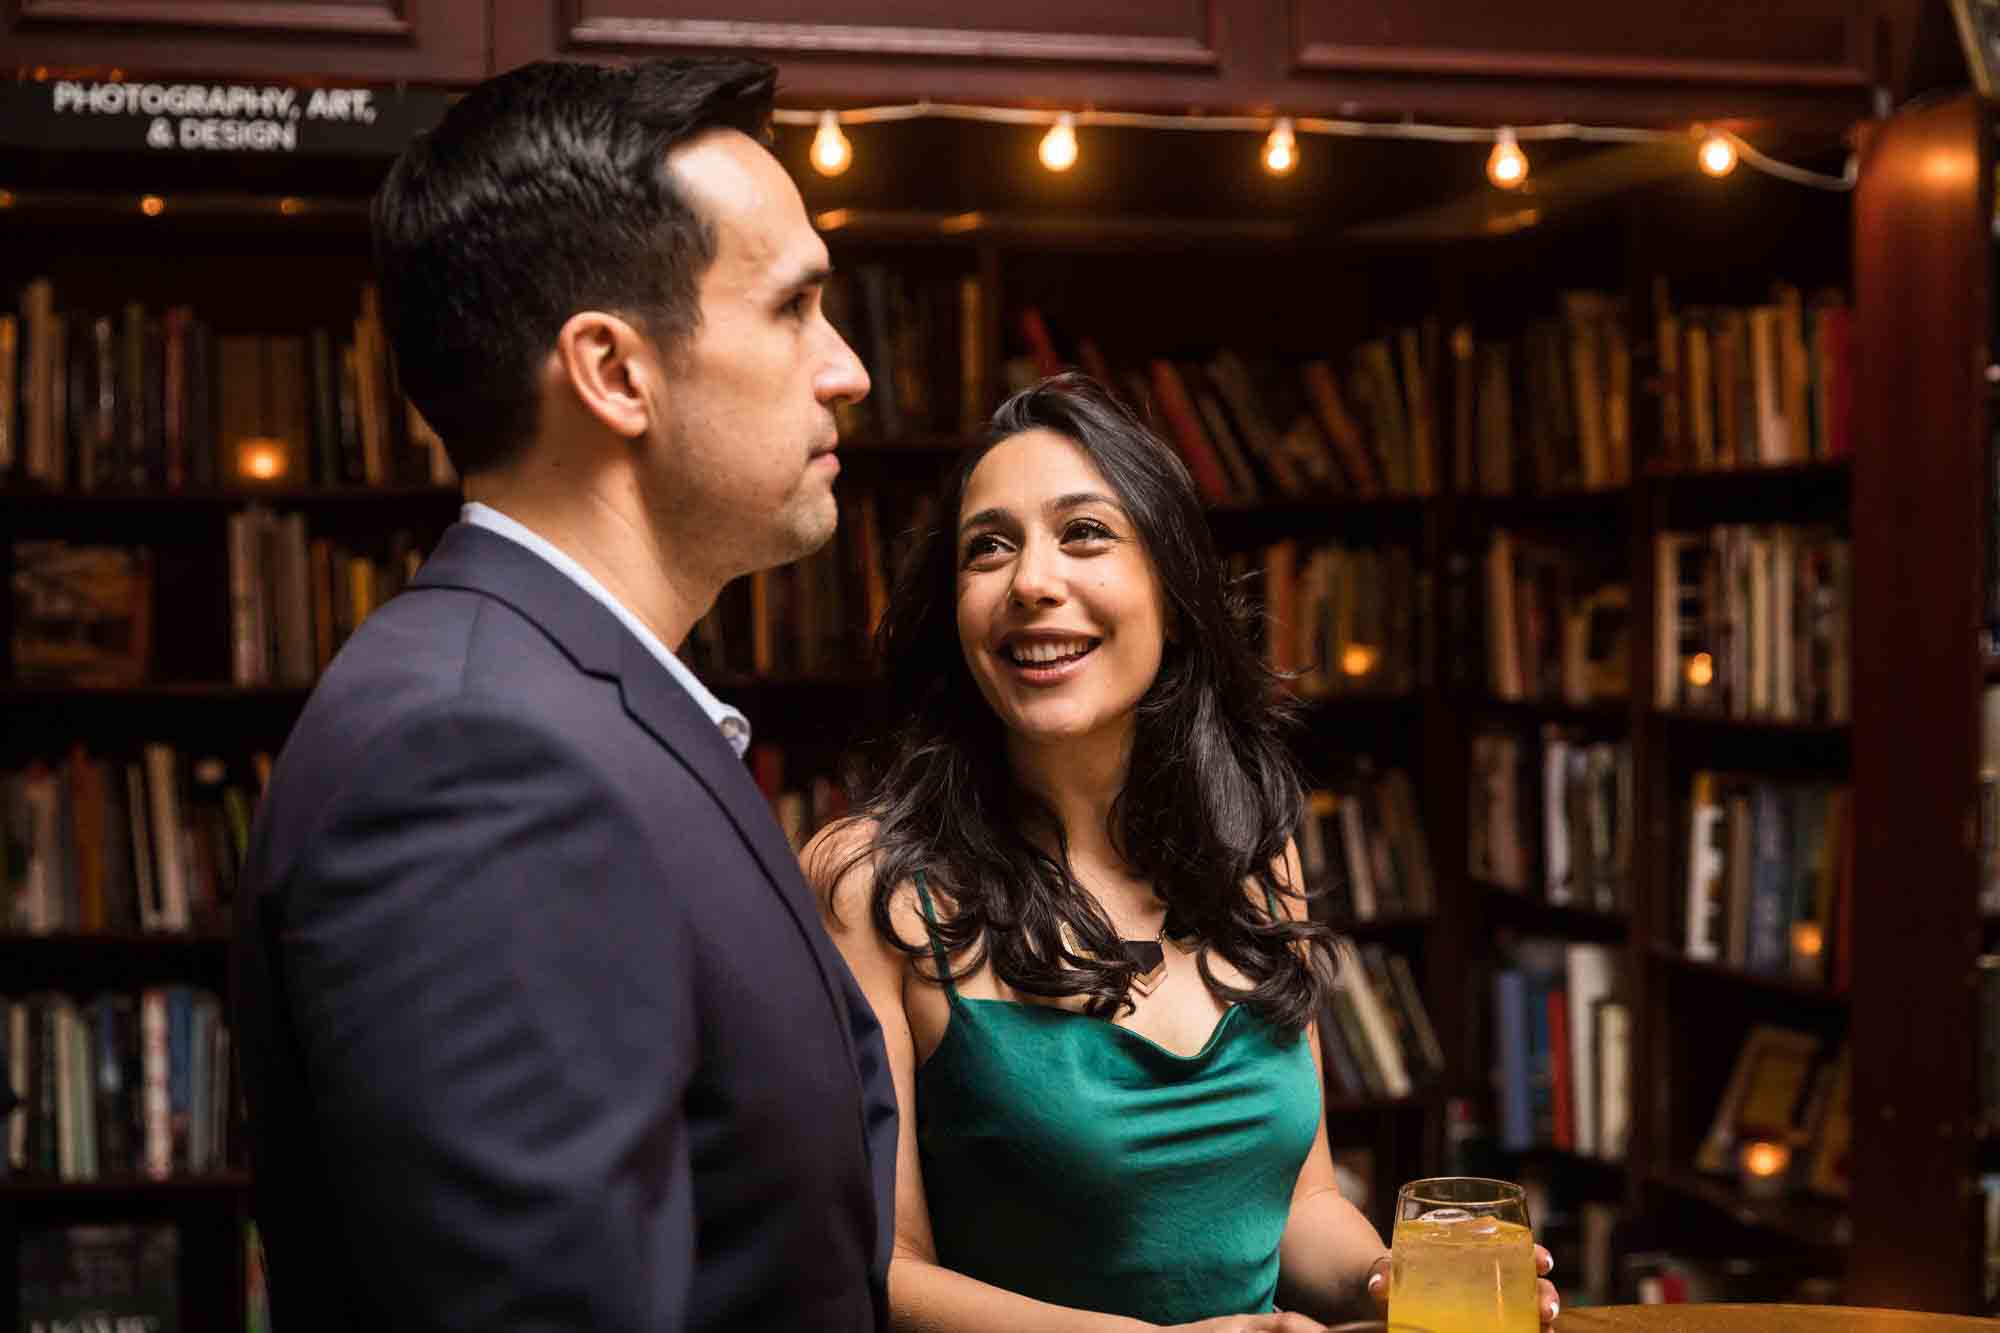 Couple chatting in front of bookcases for an article on wedding ceremony photo tips